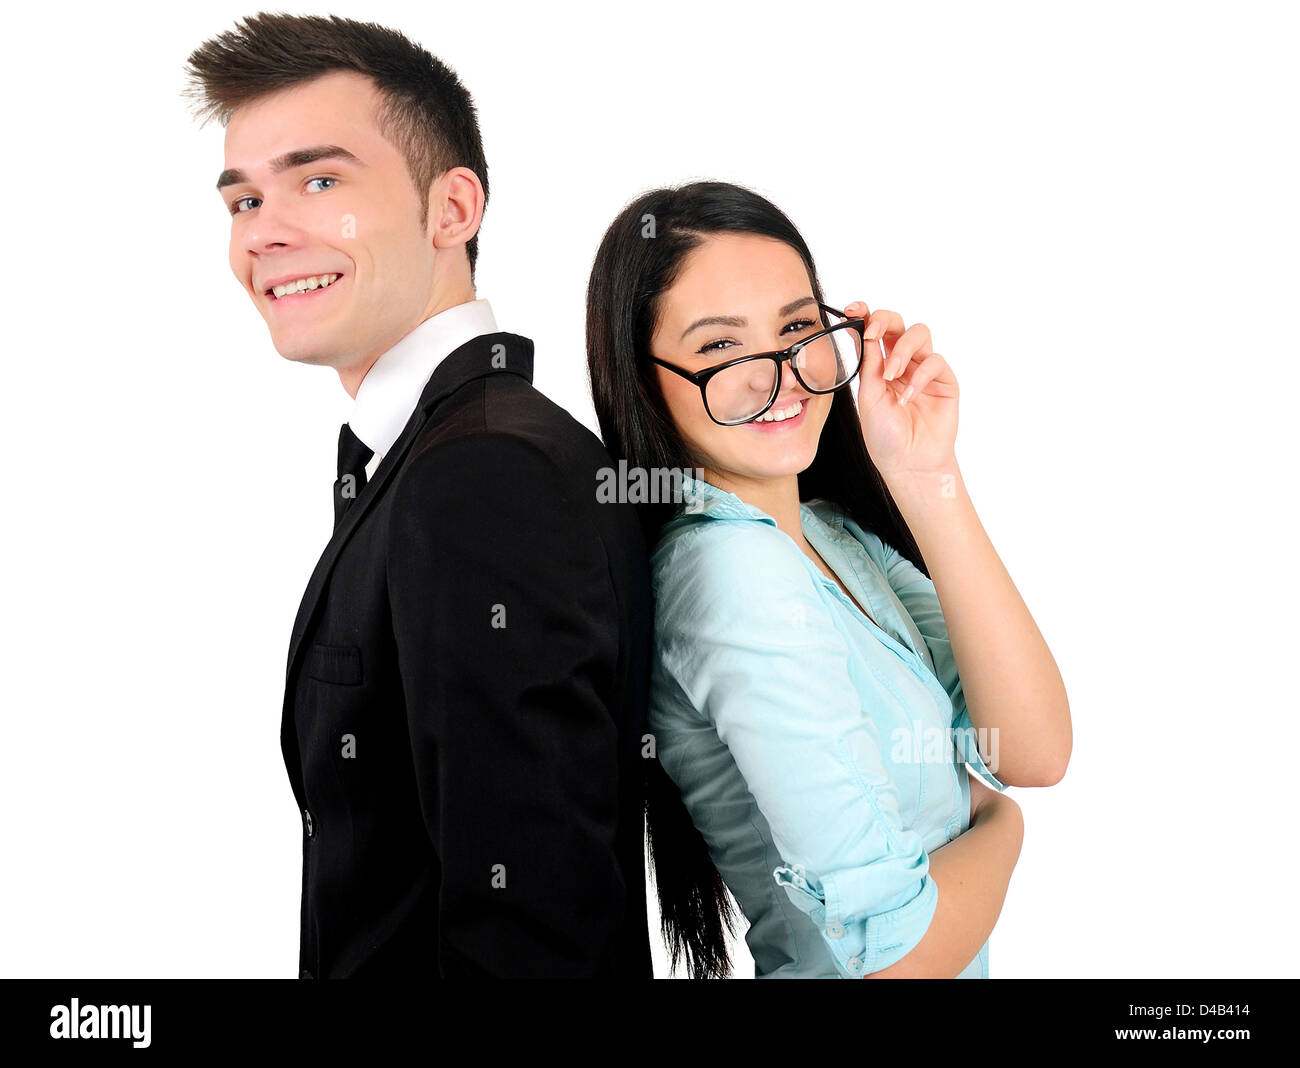 Isolated young business couple standing Stock Photo